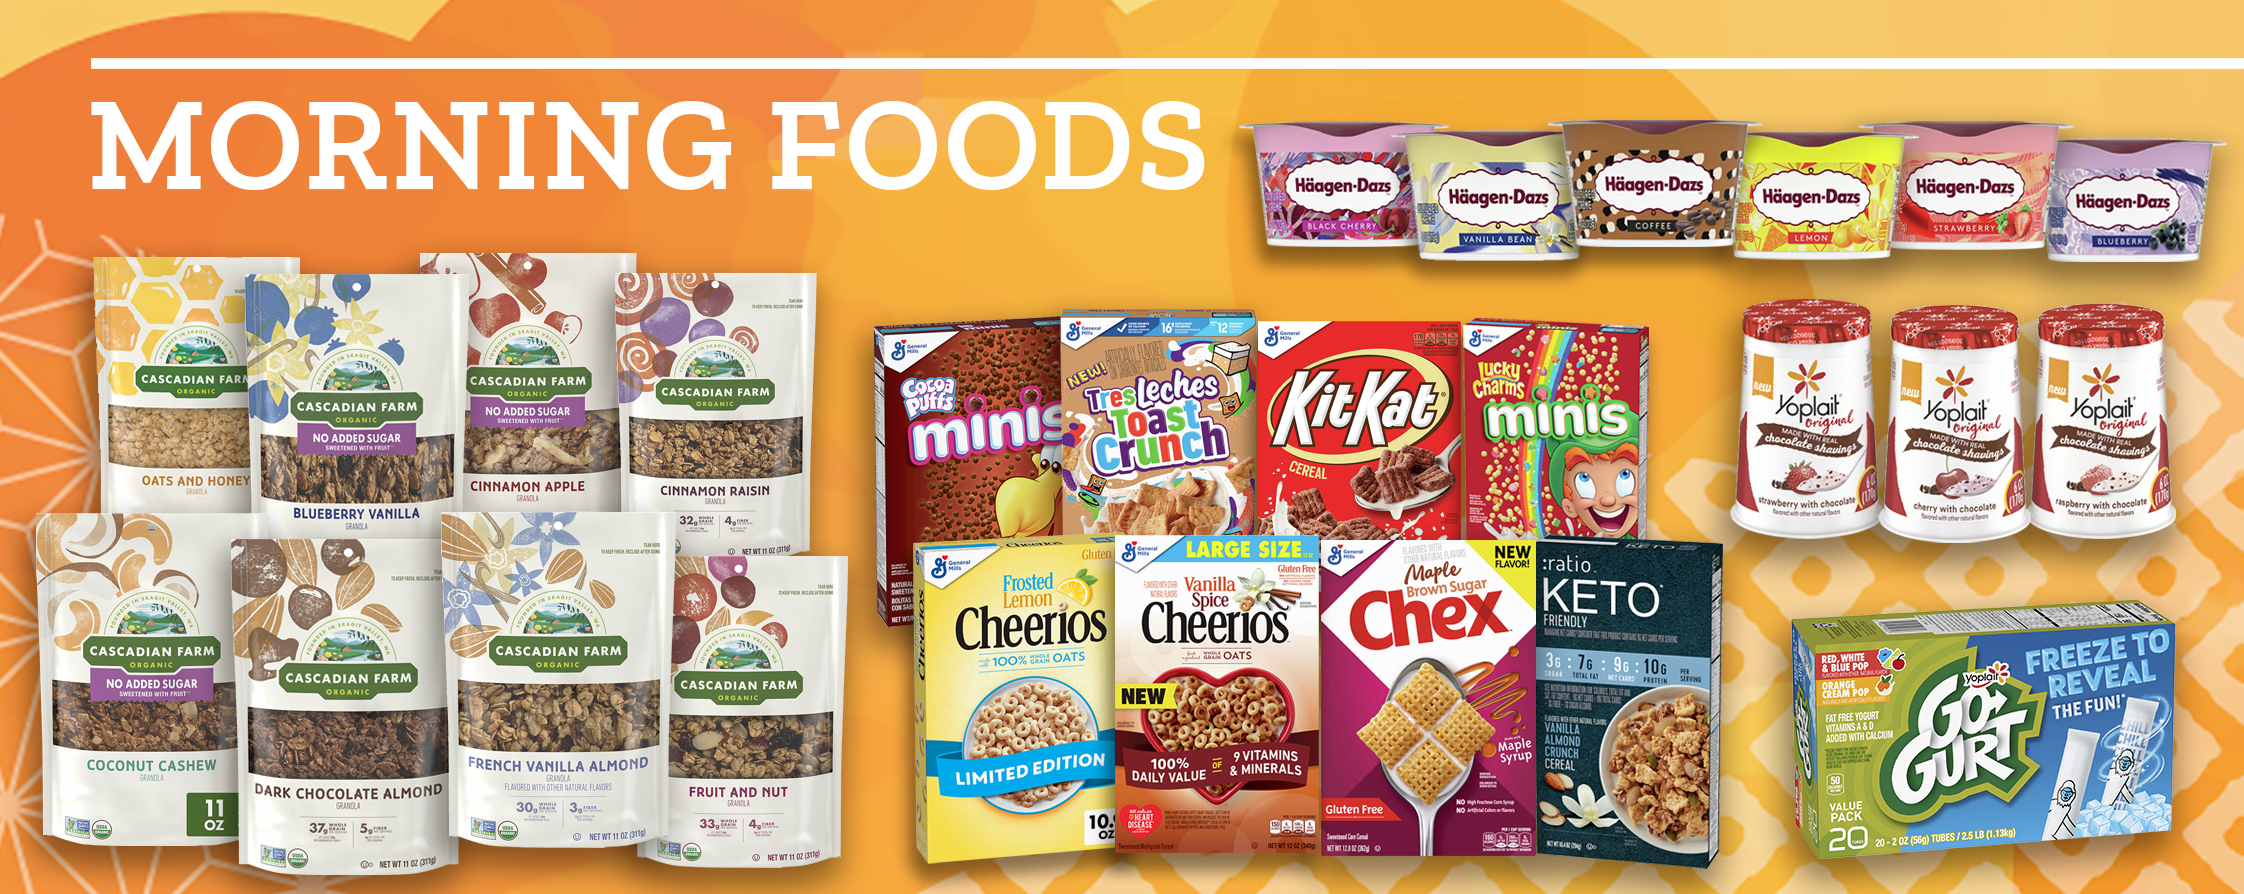 New Morning Foods products